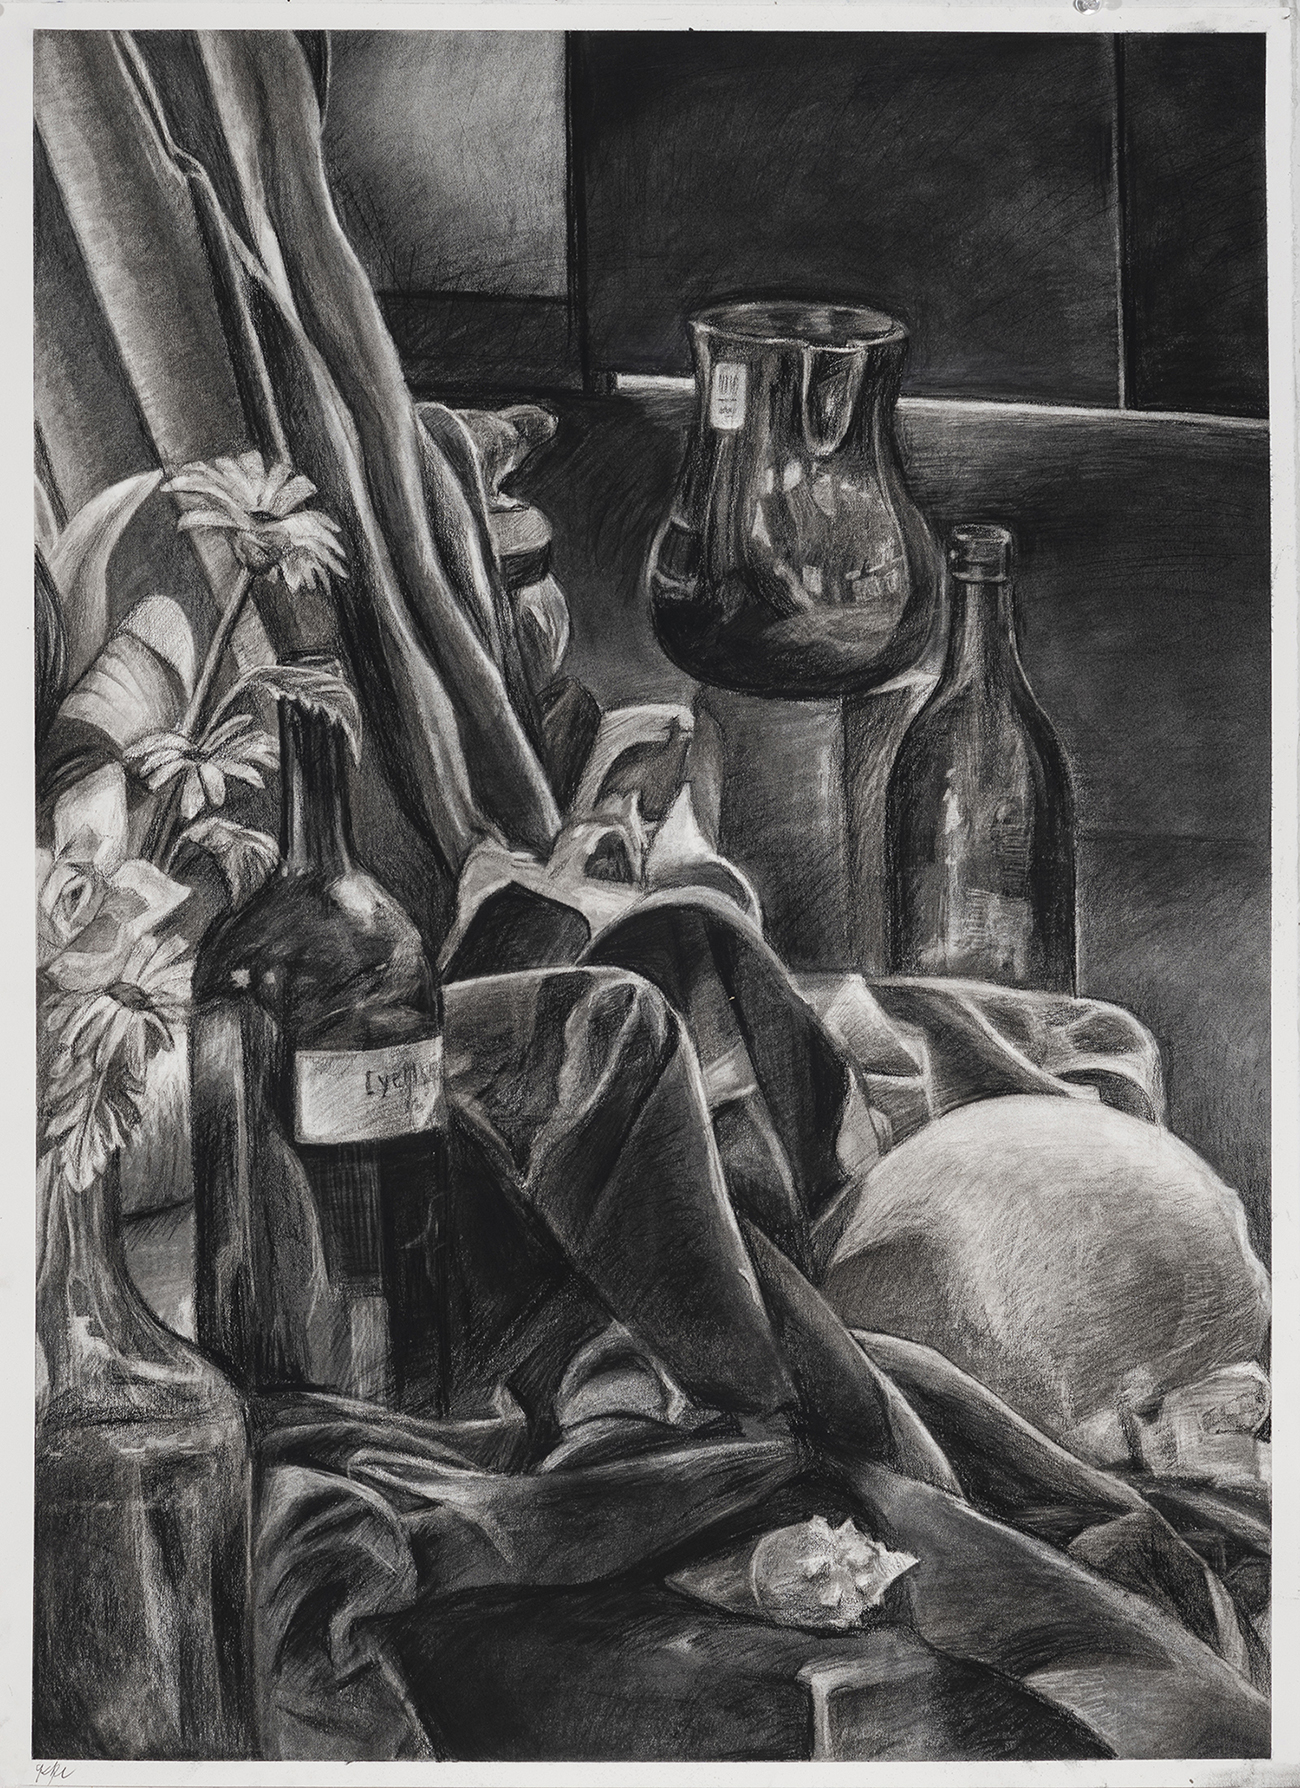 A still-life drawing of flowers, a wine bottle, vase and other objects.